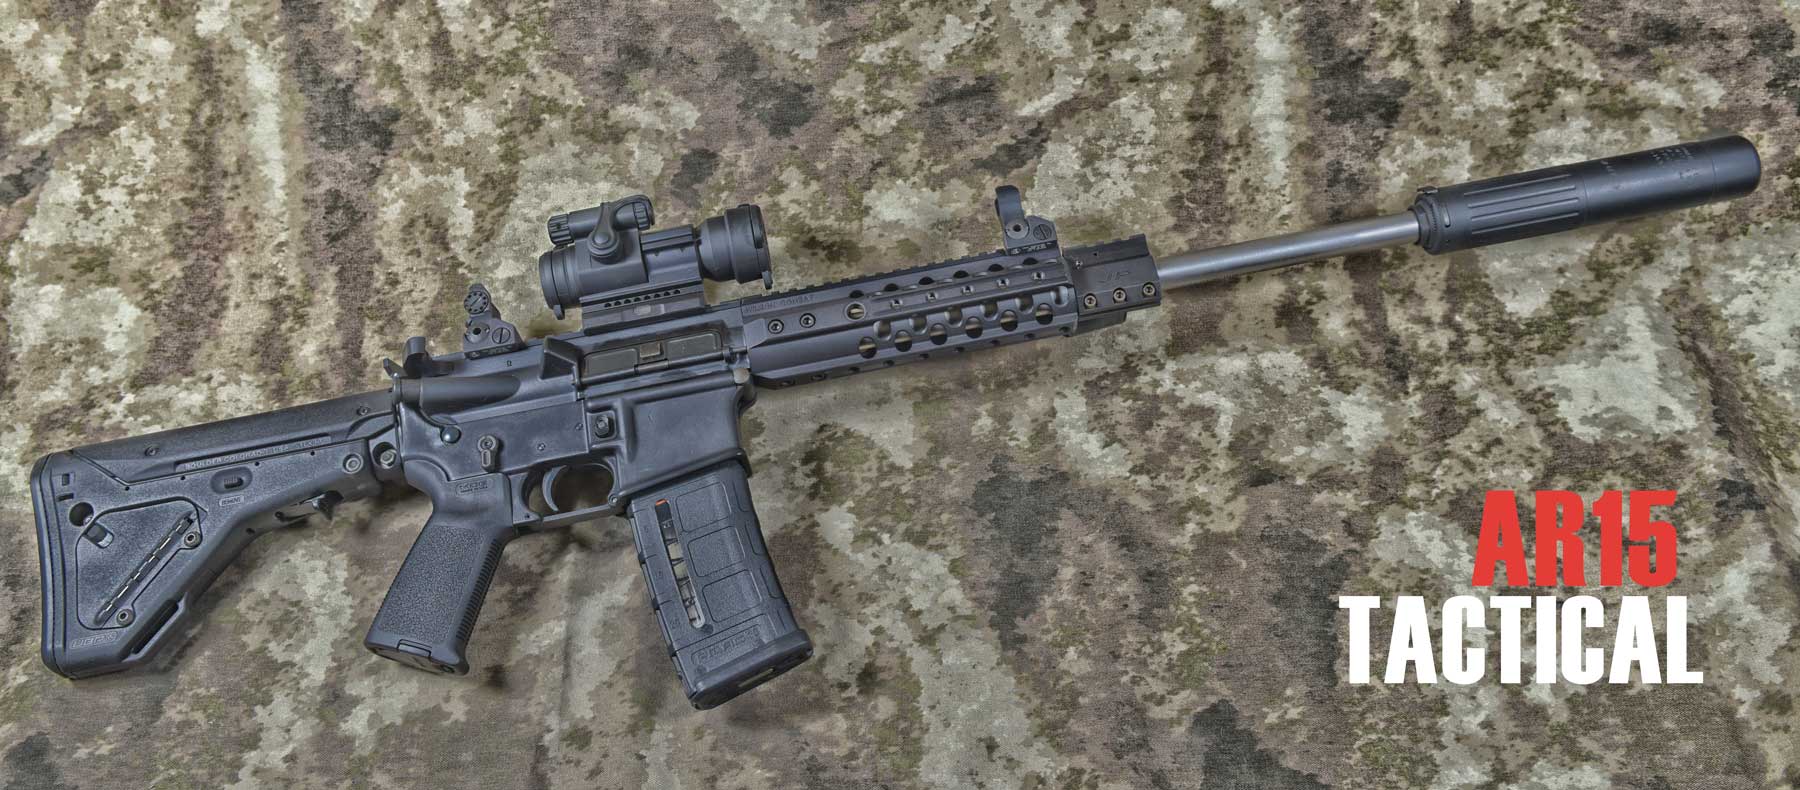 AR15 TACTICAL is the internets premiere AR 15 Authority